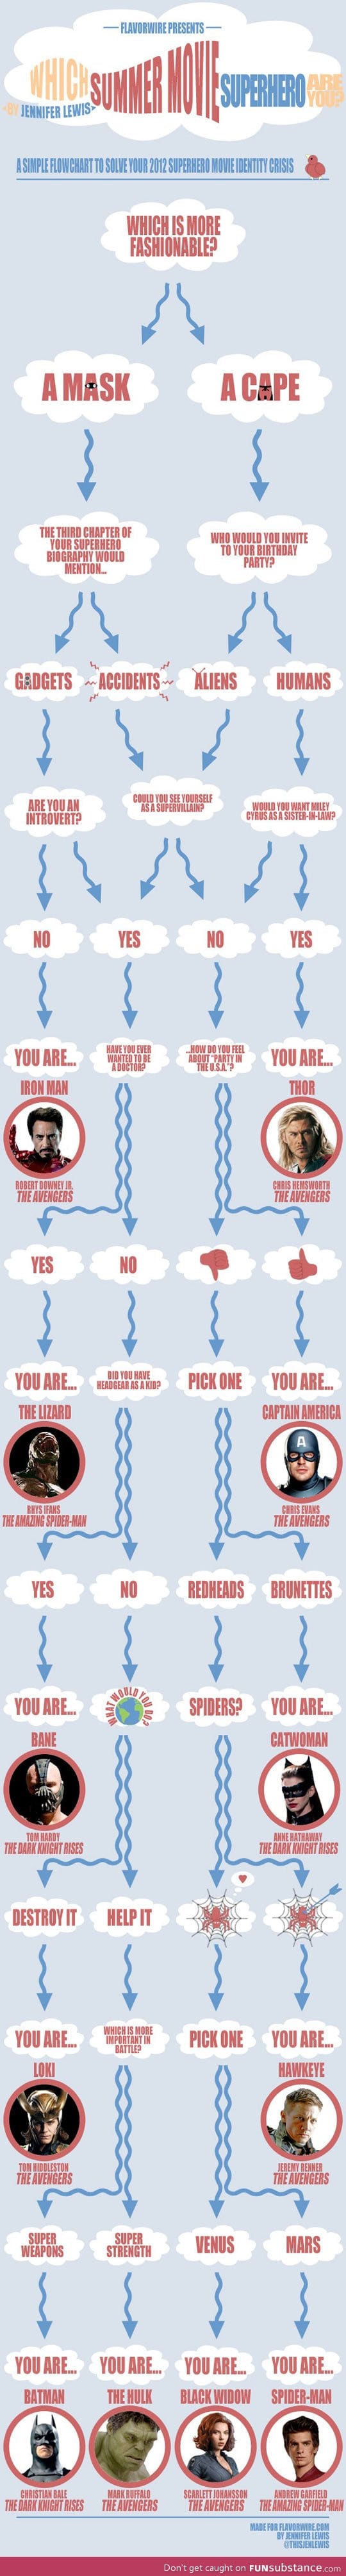 Which Superhero Are You?